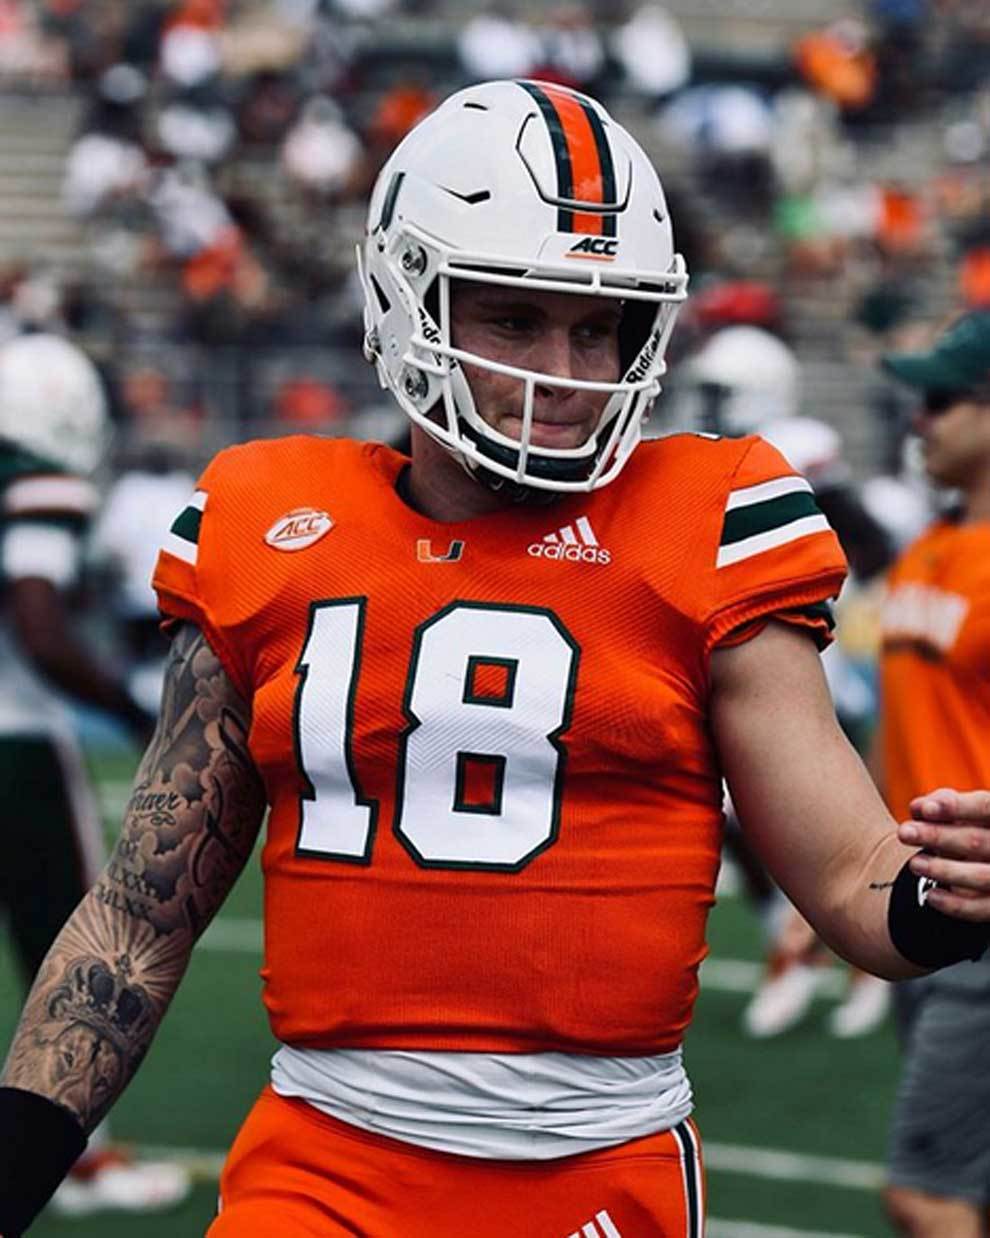 Tate Martell, quarter-back of the Miami Hurricanes, is dating. 